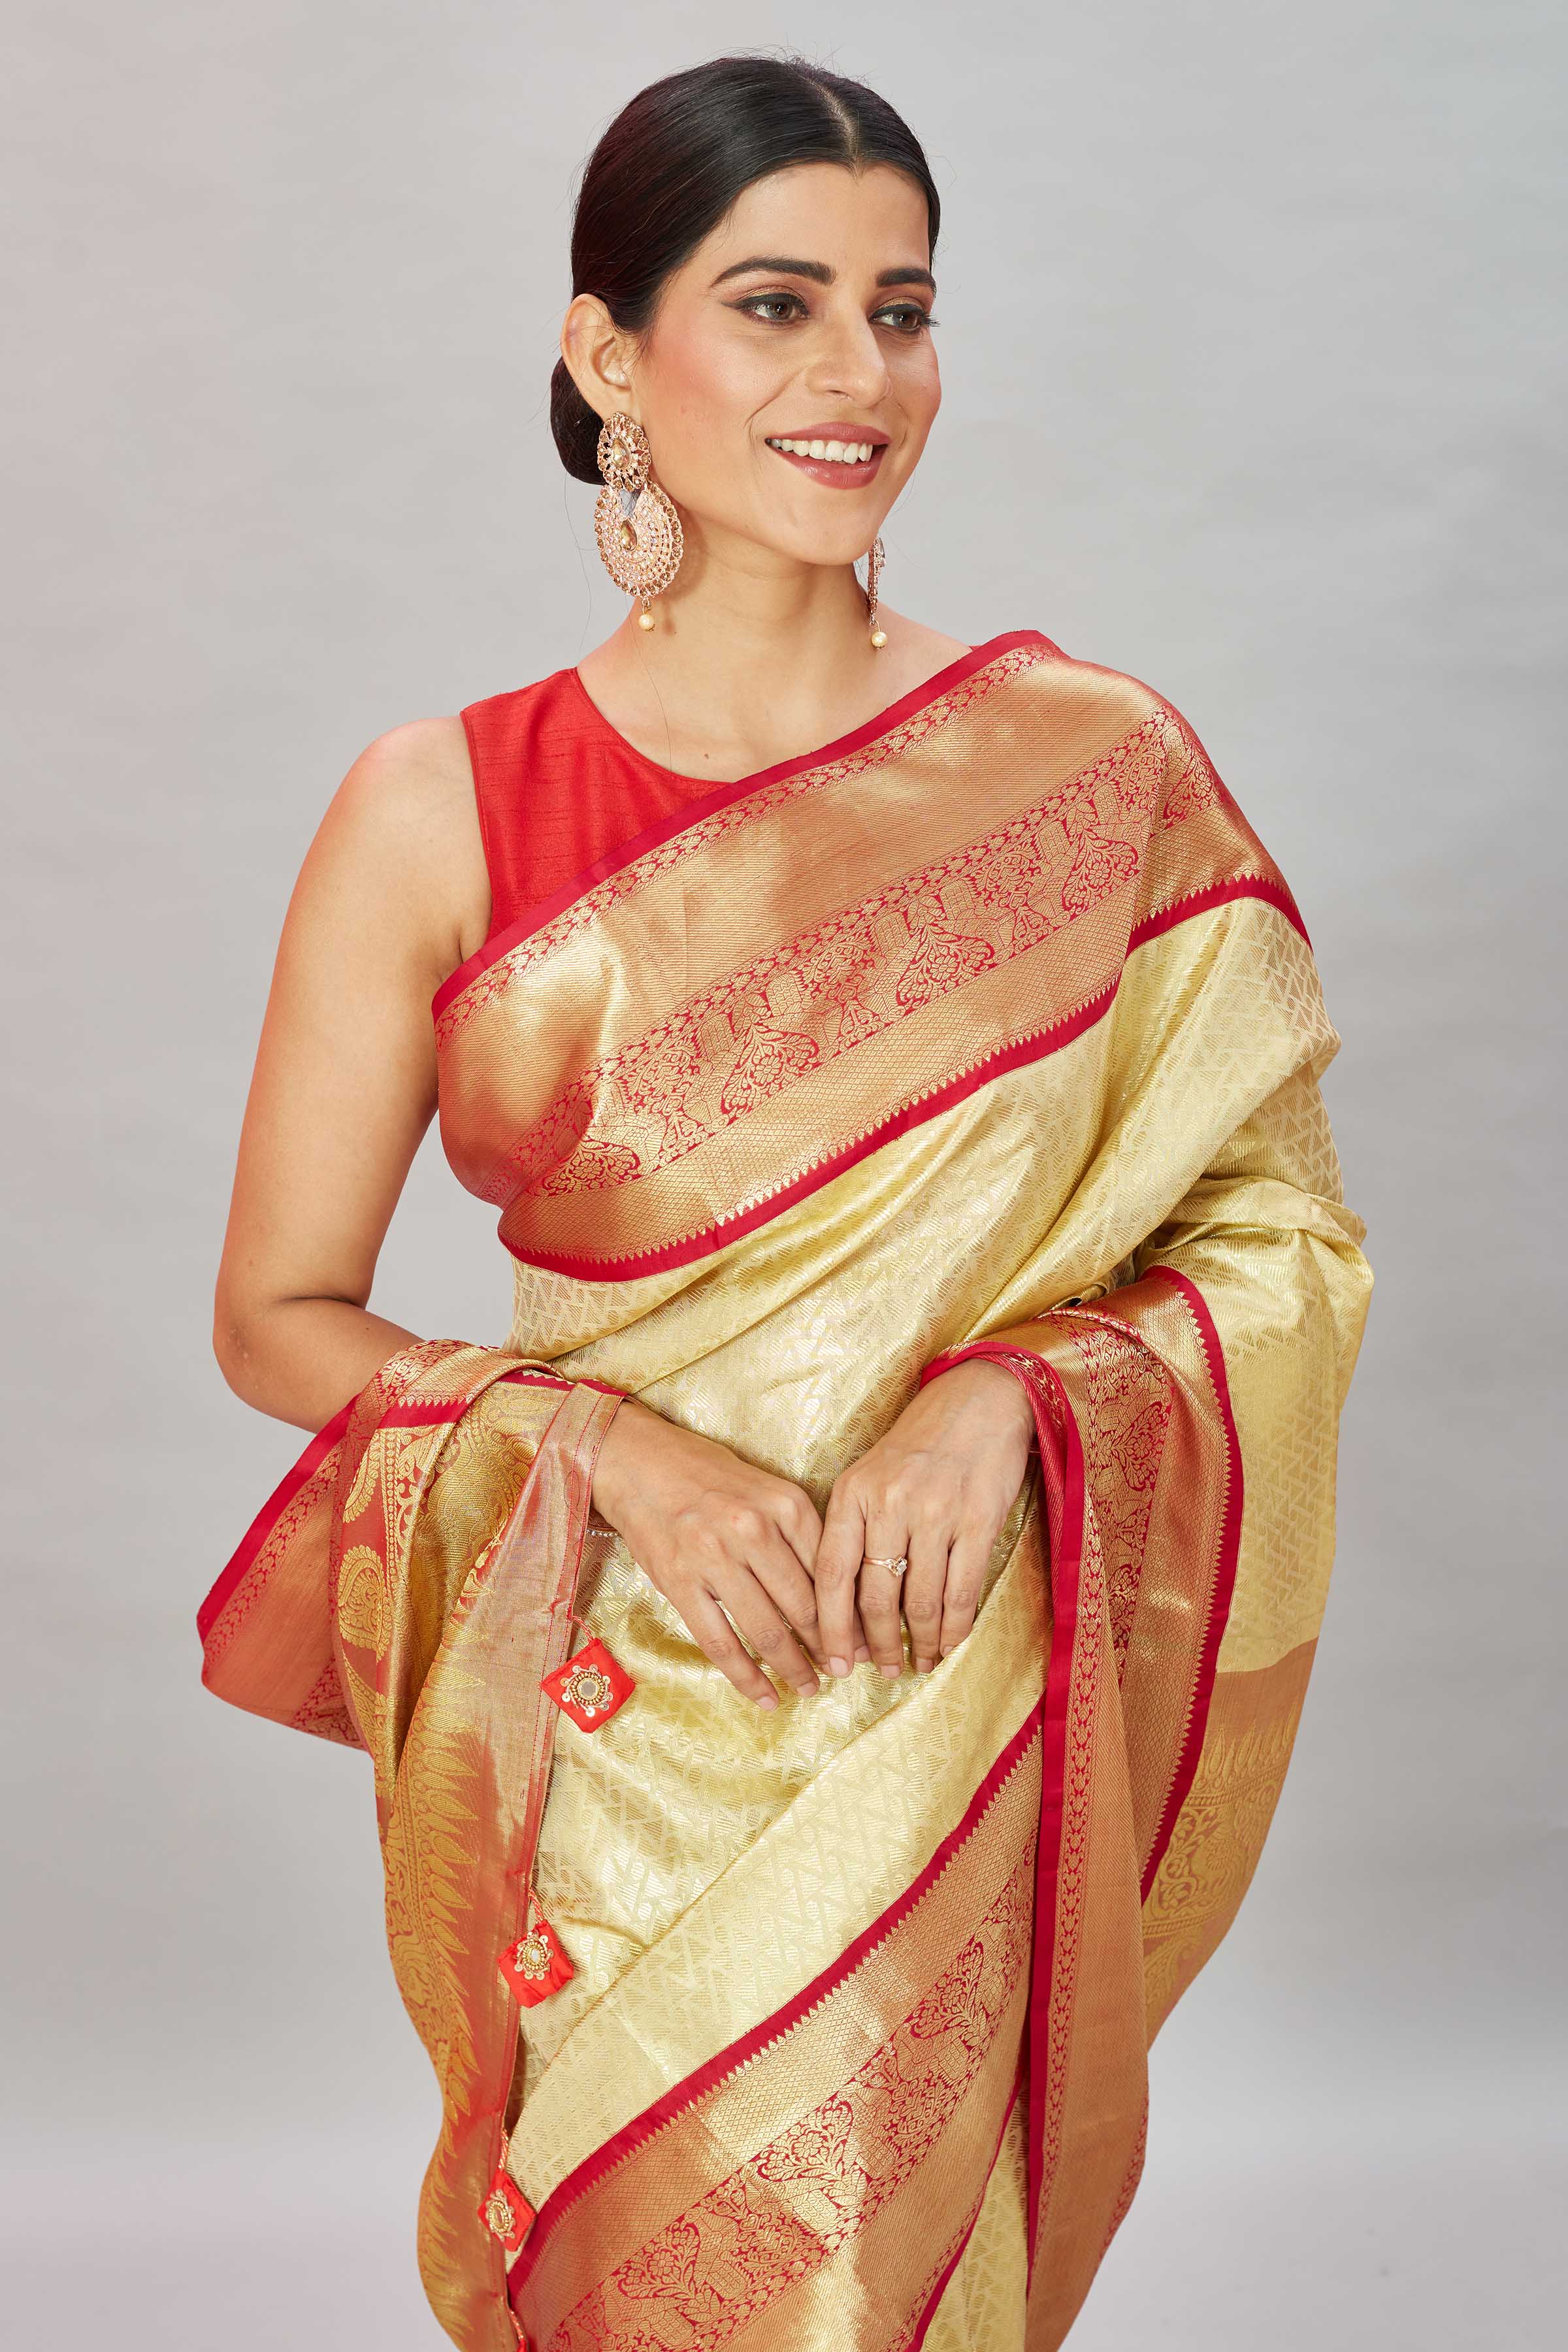 Buy cream Kanjivaram silk sari online in USA with red zari border. Look your best on festive occasions in latest designer sarees, pure silk sarees, Kanjivaram silk saris, handwoven saris, tussar silk sarees, embroidered saris from Pure Elegance Indian clothing store in USA.-closeup